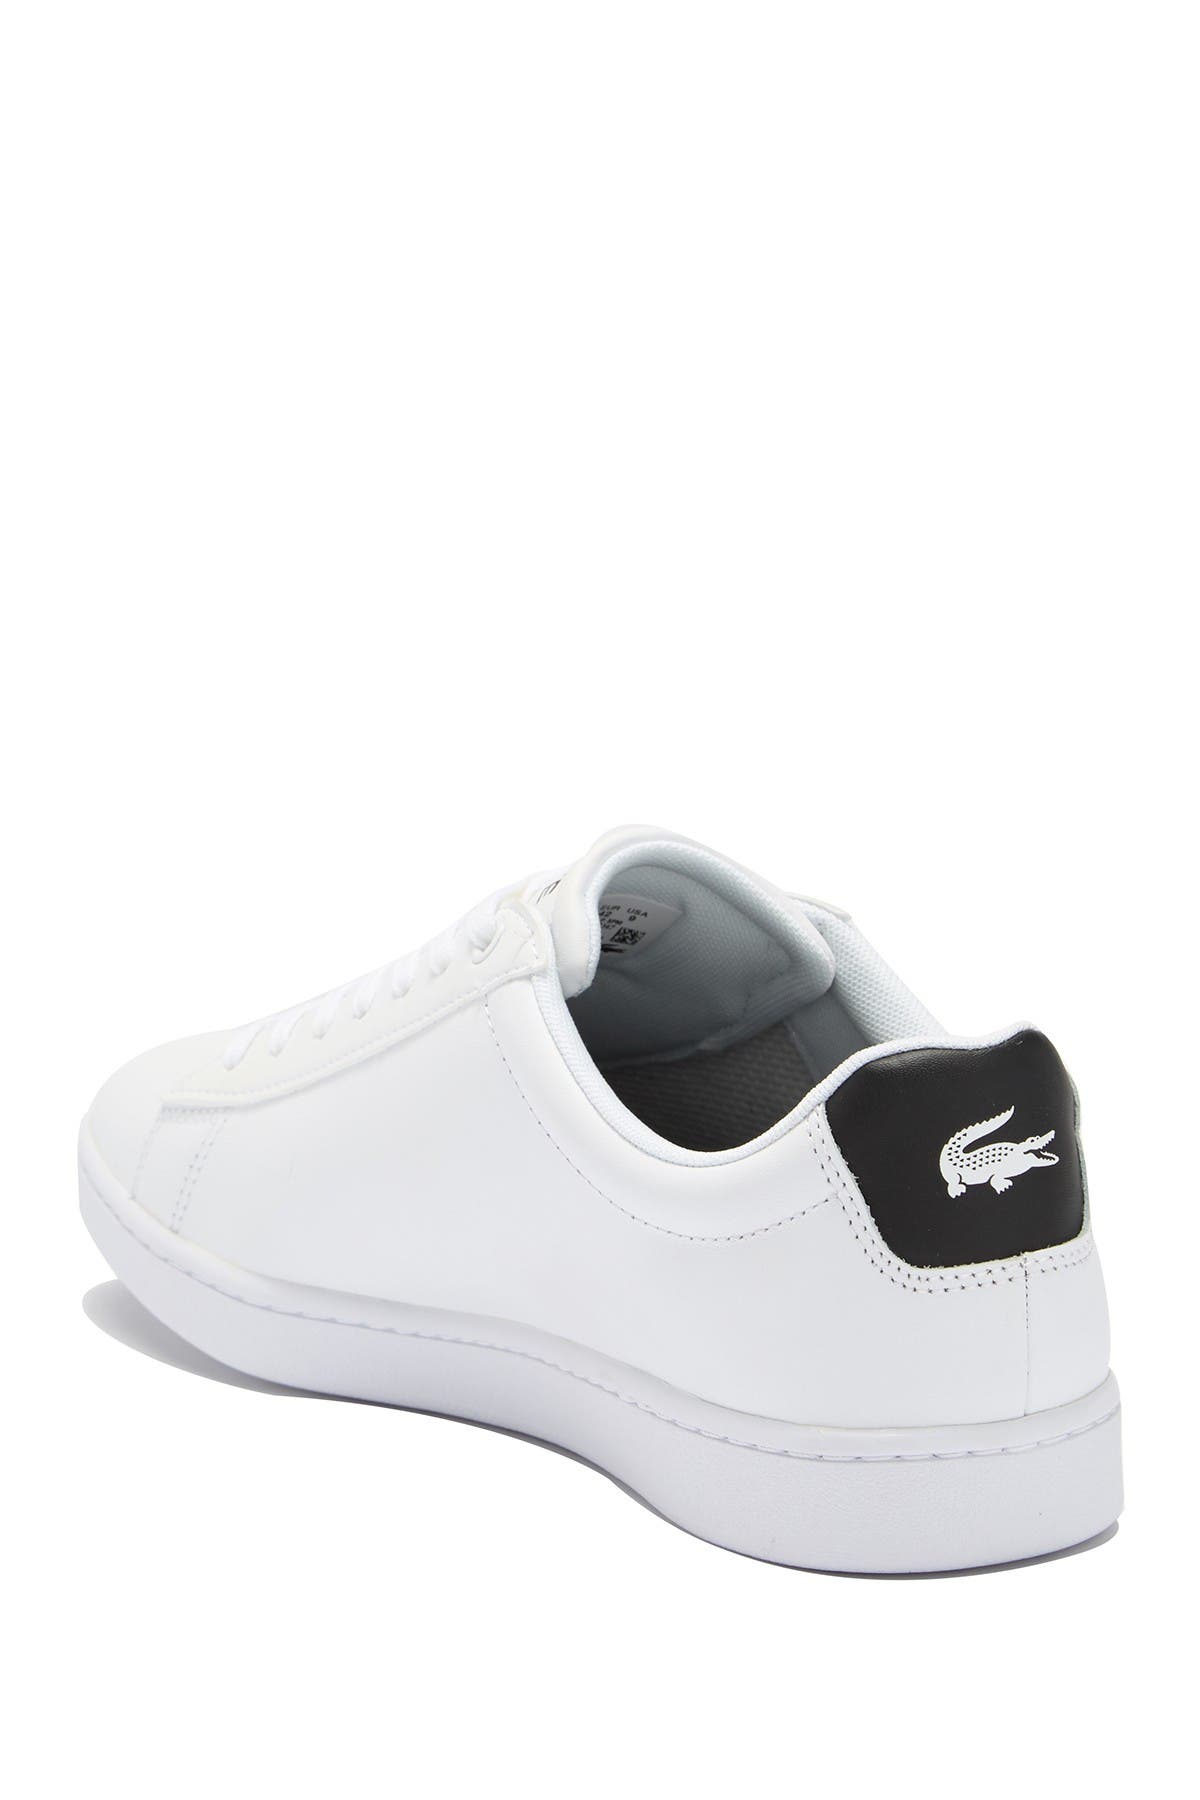 Lacoste | Hydez 318 1 Leather Sneaker 